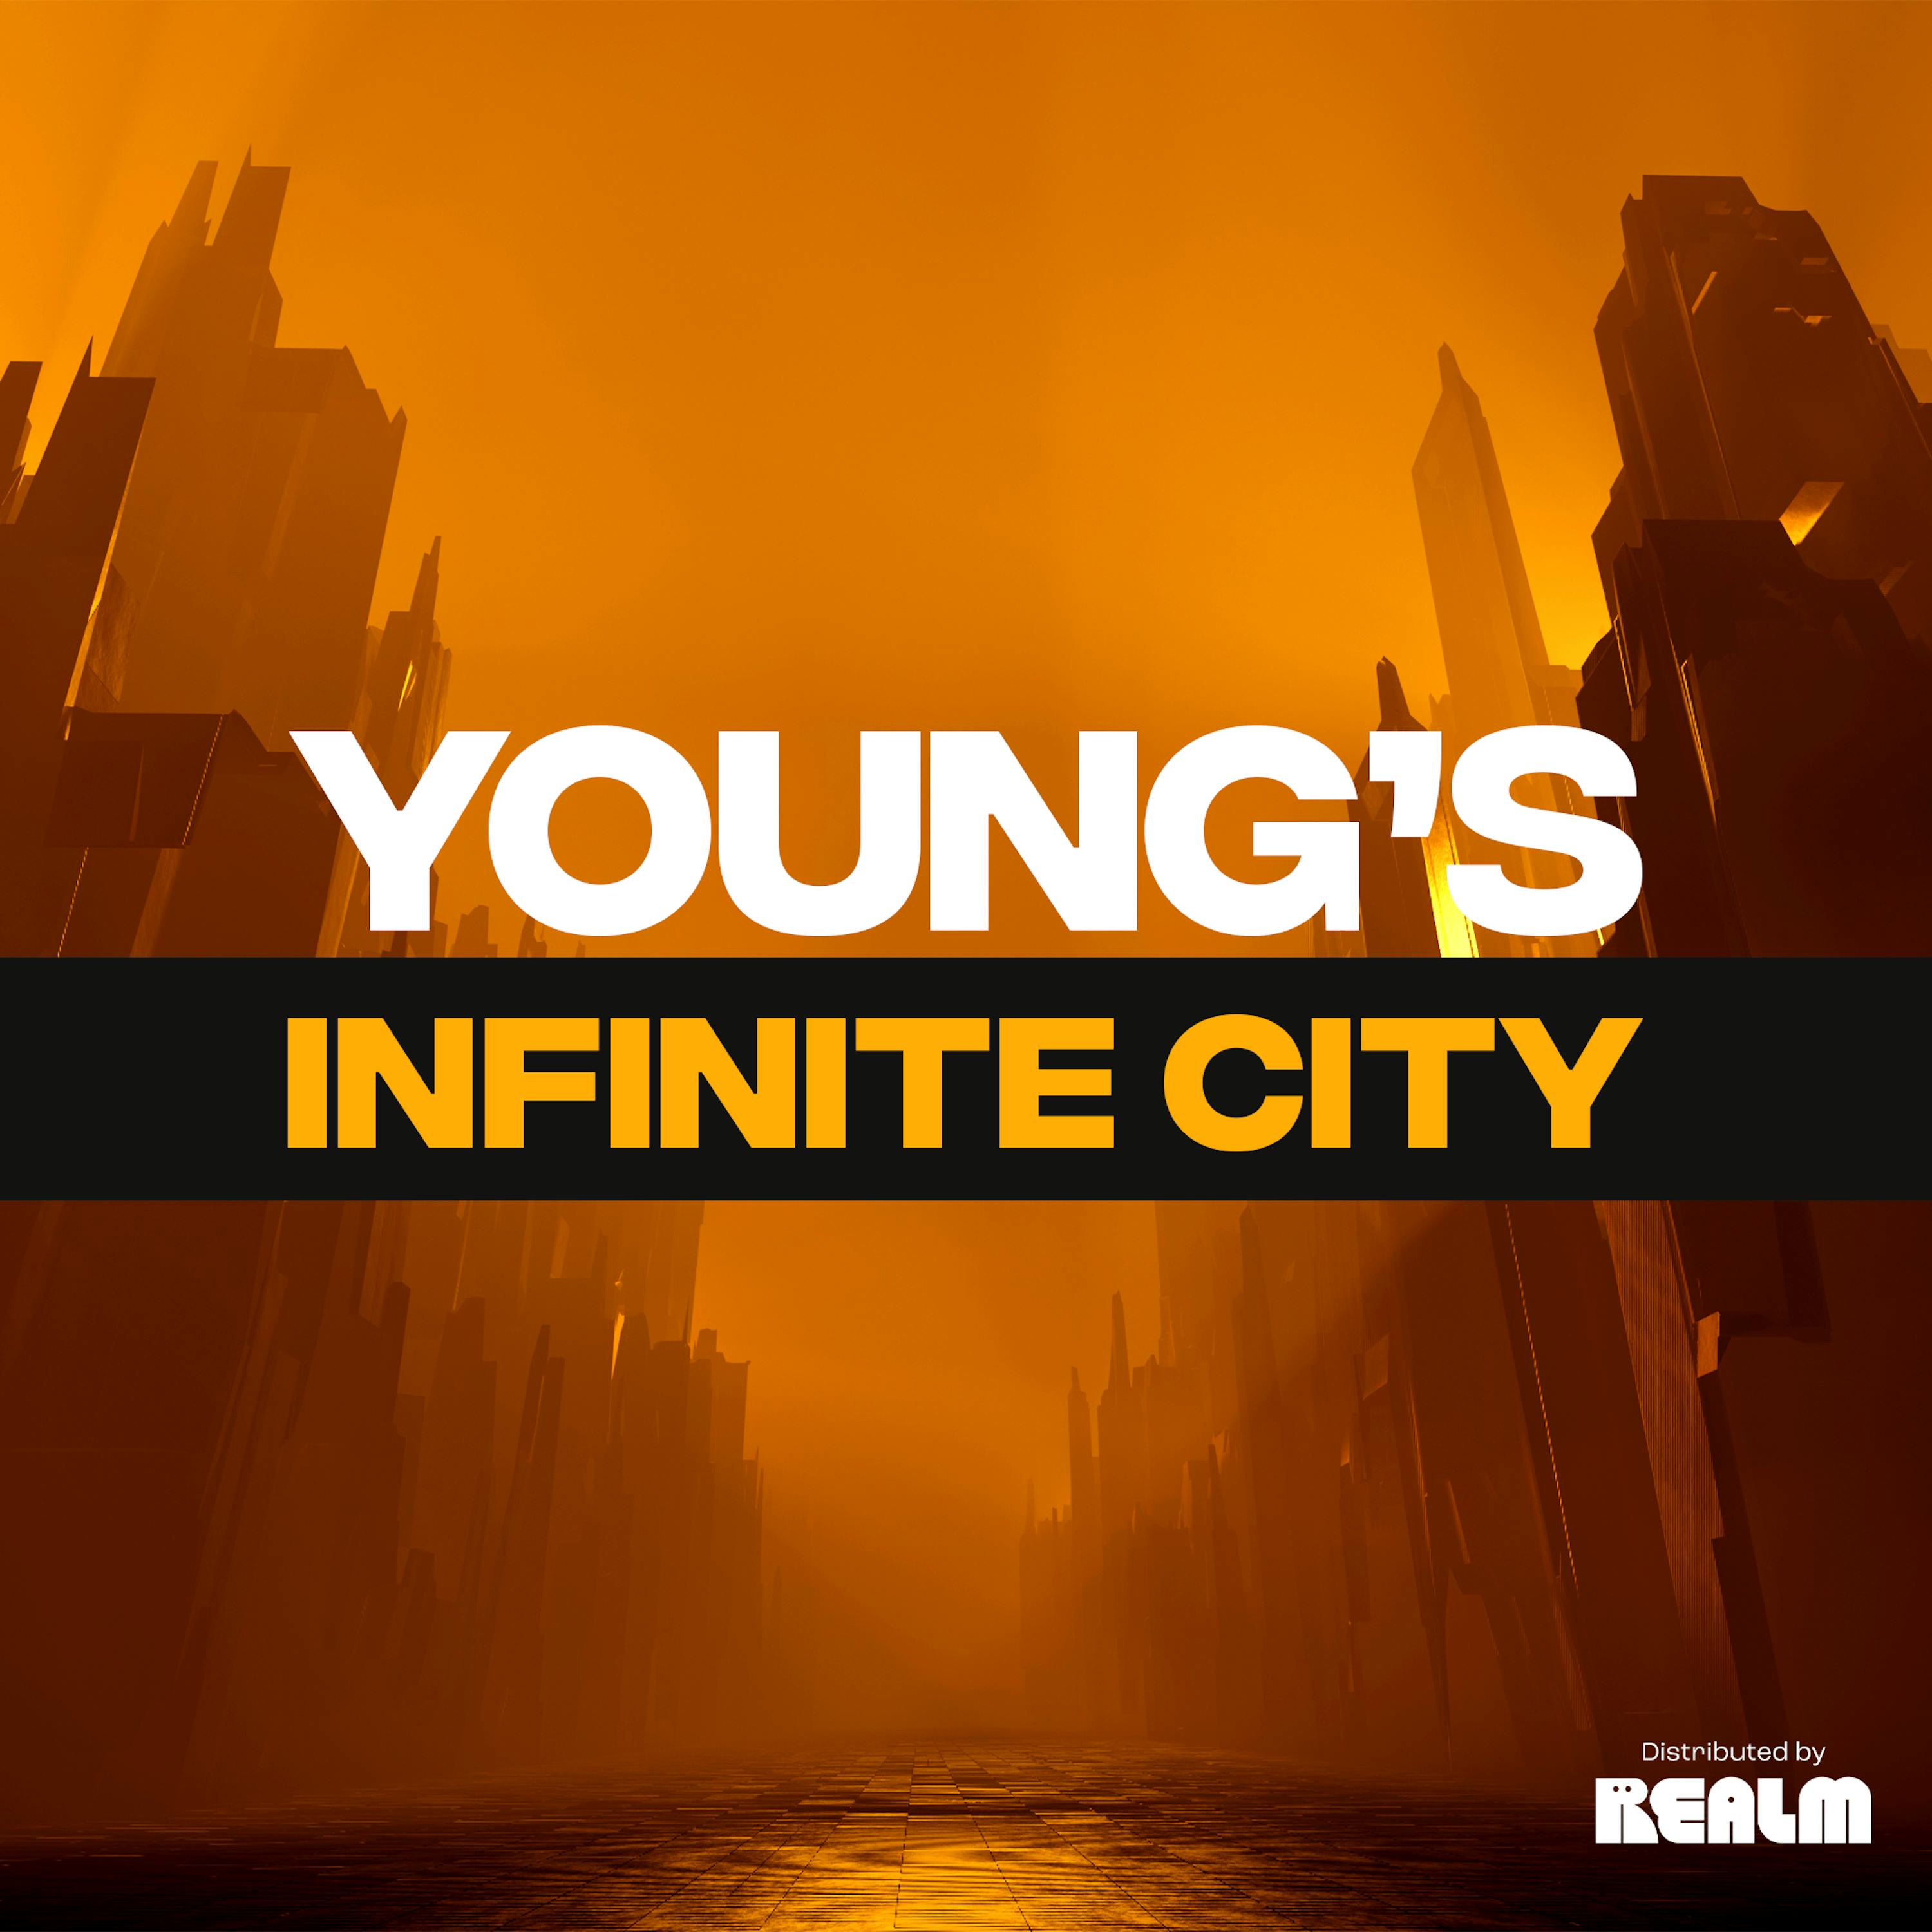 SNEAK PEEK: Young's Infinite City, from the creators of The Patron Saint of Suicides